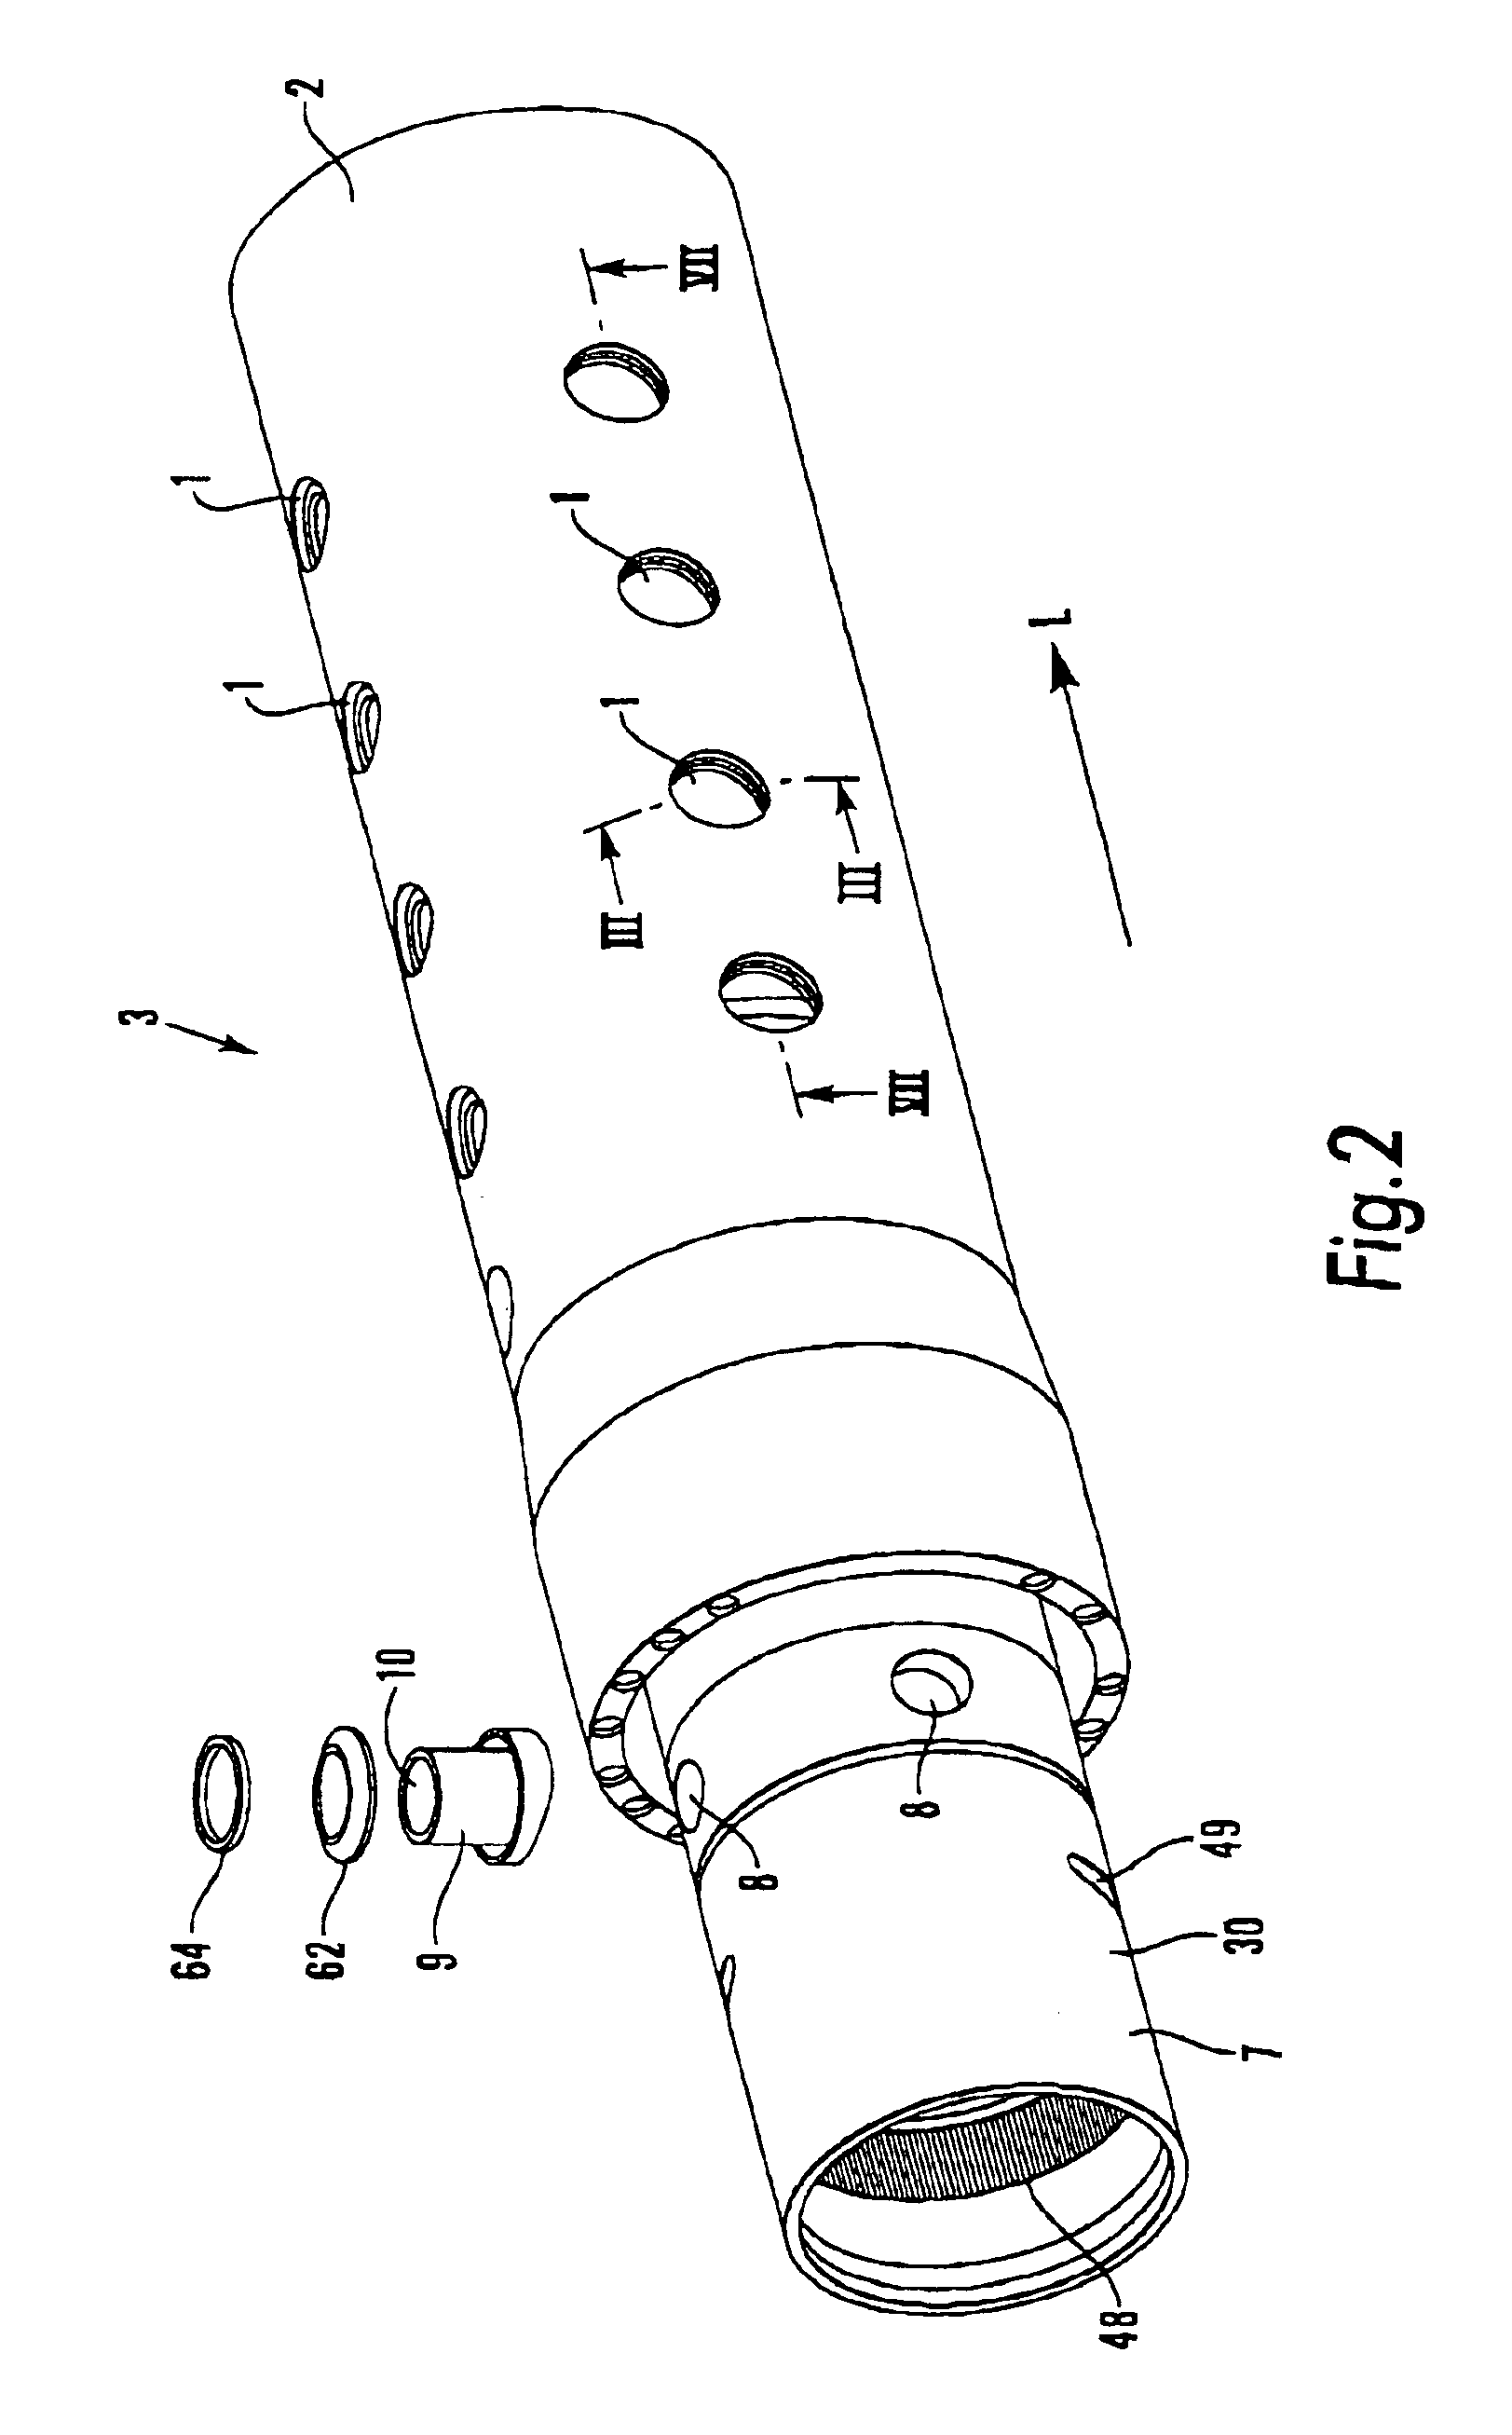 Sleeve valve for controlling fluid flow between a hydrocarbon reservoir and tubing in a well and method for the assembly of a sleeve valve